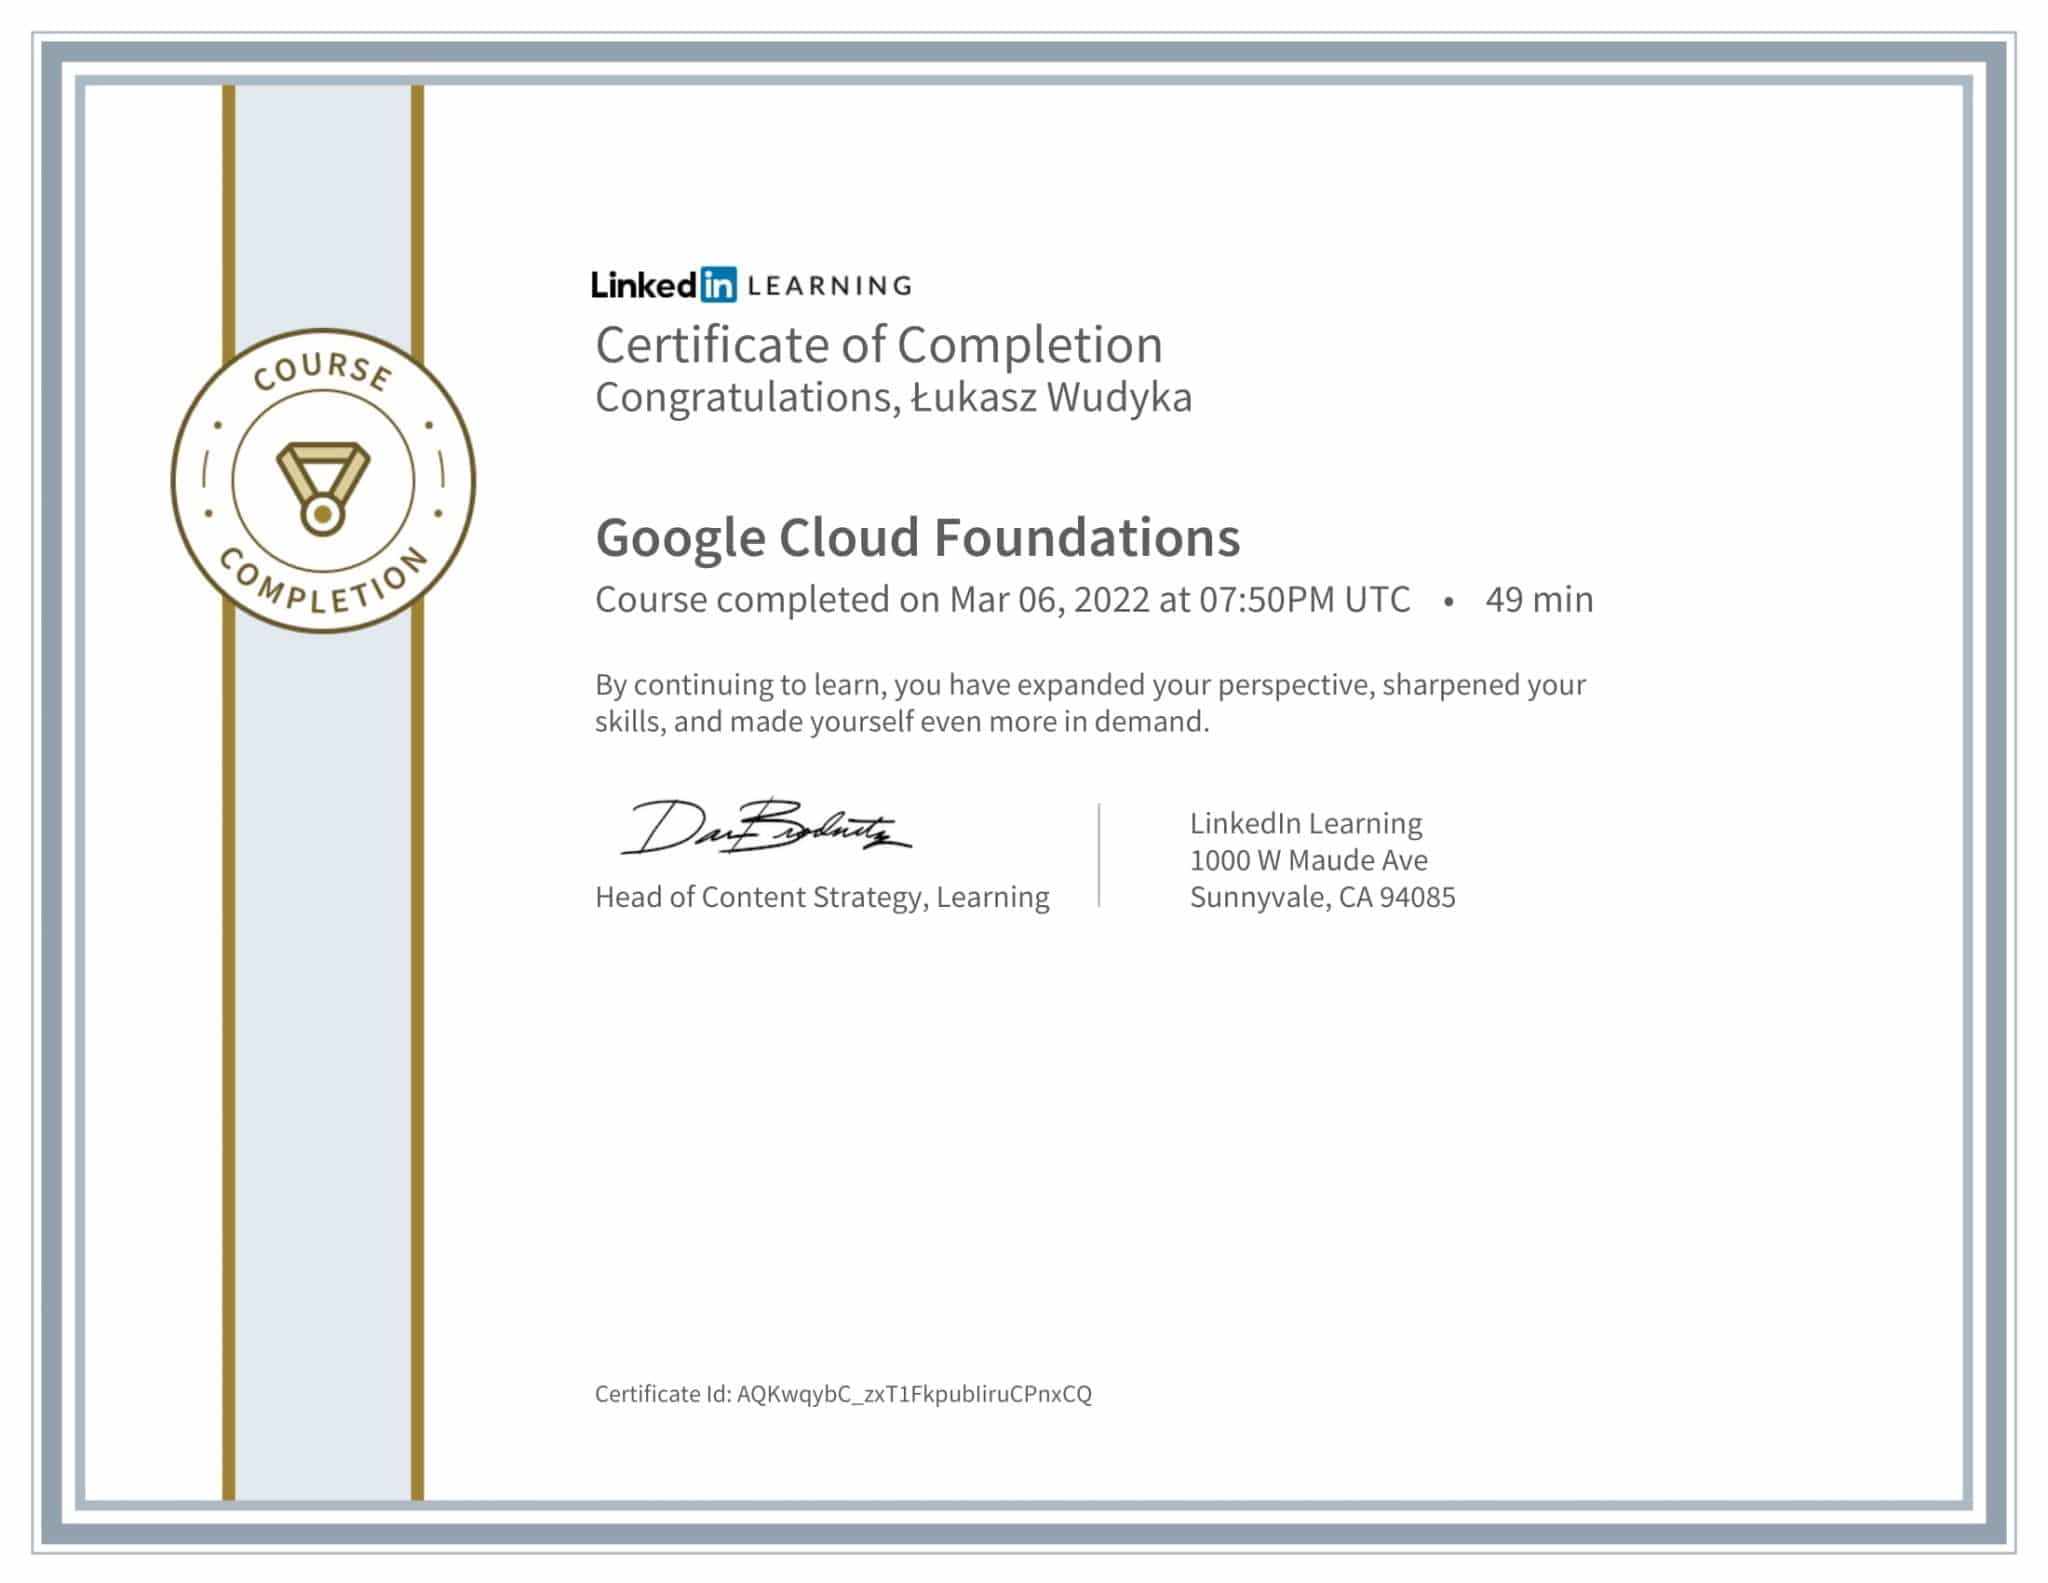 CertificateOfCompletion_Google Cloud Foundations-1